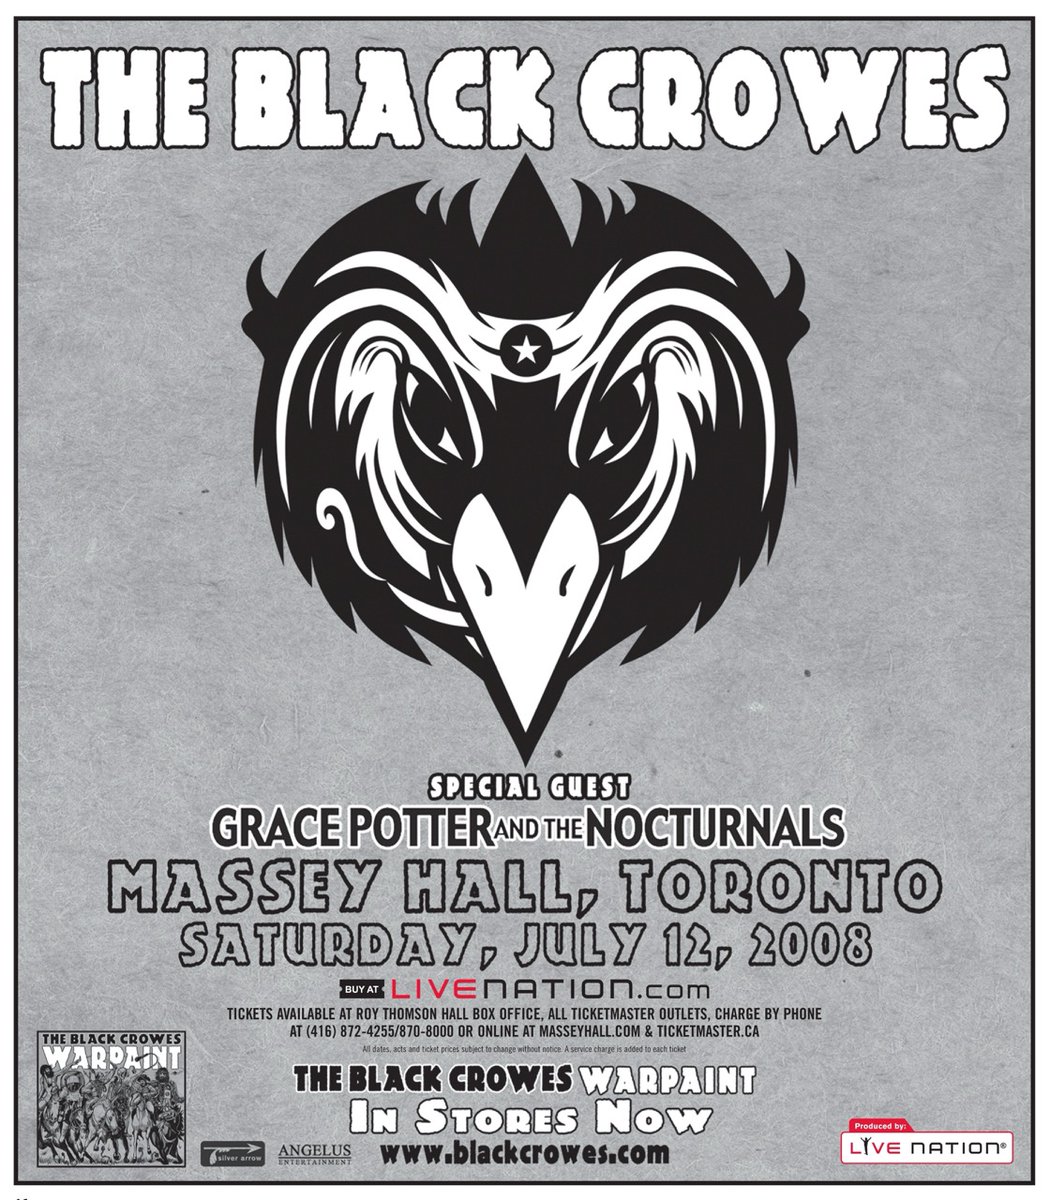 From the vault: The Black Crowes at Massey Hall in 2008. @theblackcrowes return to Massey Hall this Wednesday, April 24 Tickets: loom.ly/Vq0odFw Courtesy of @theflyervault